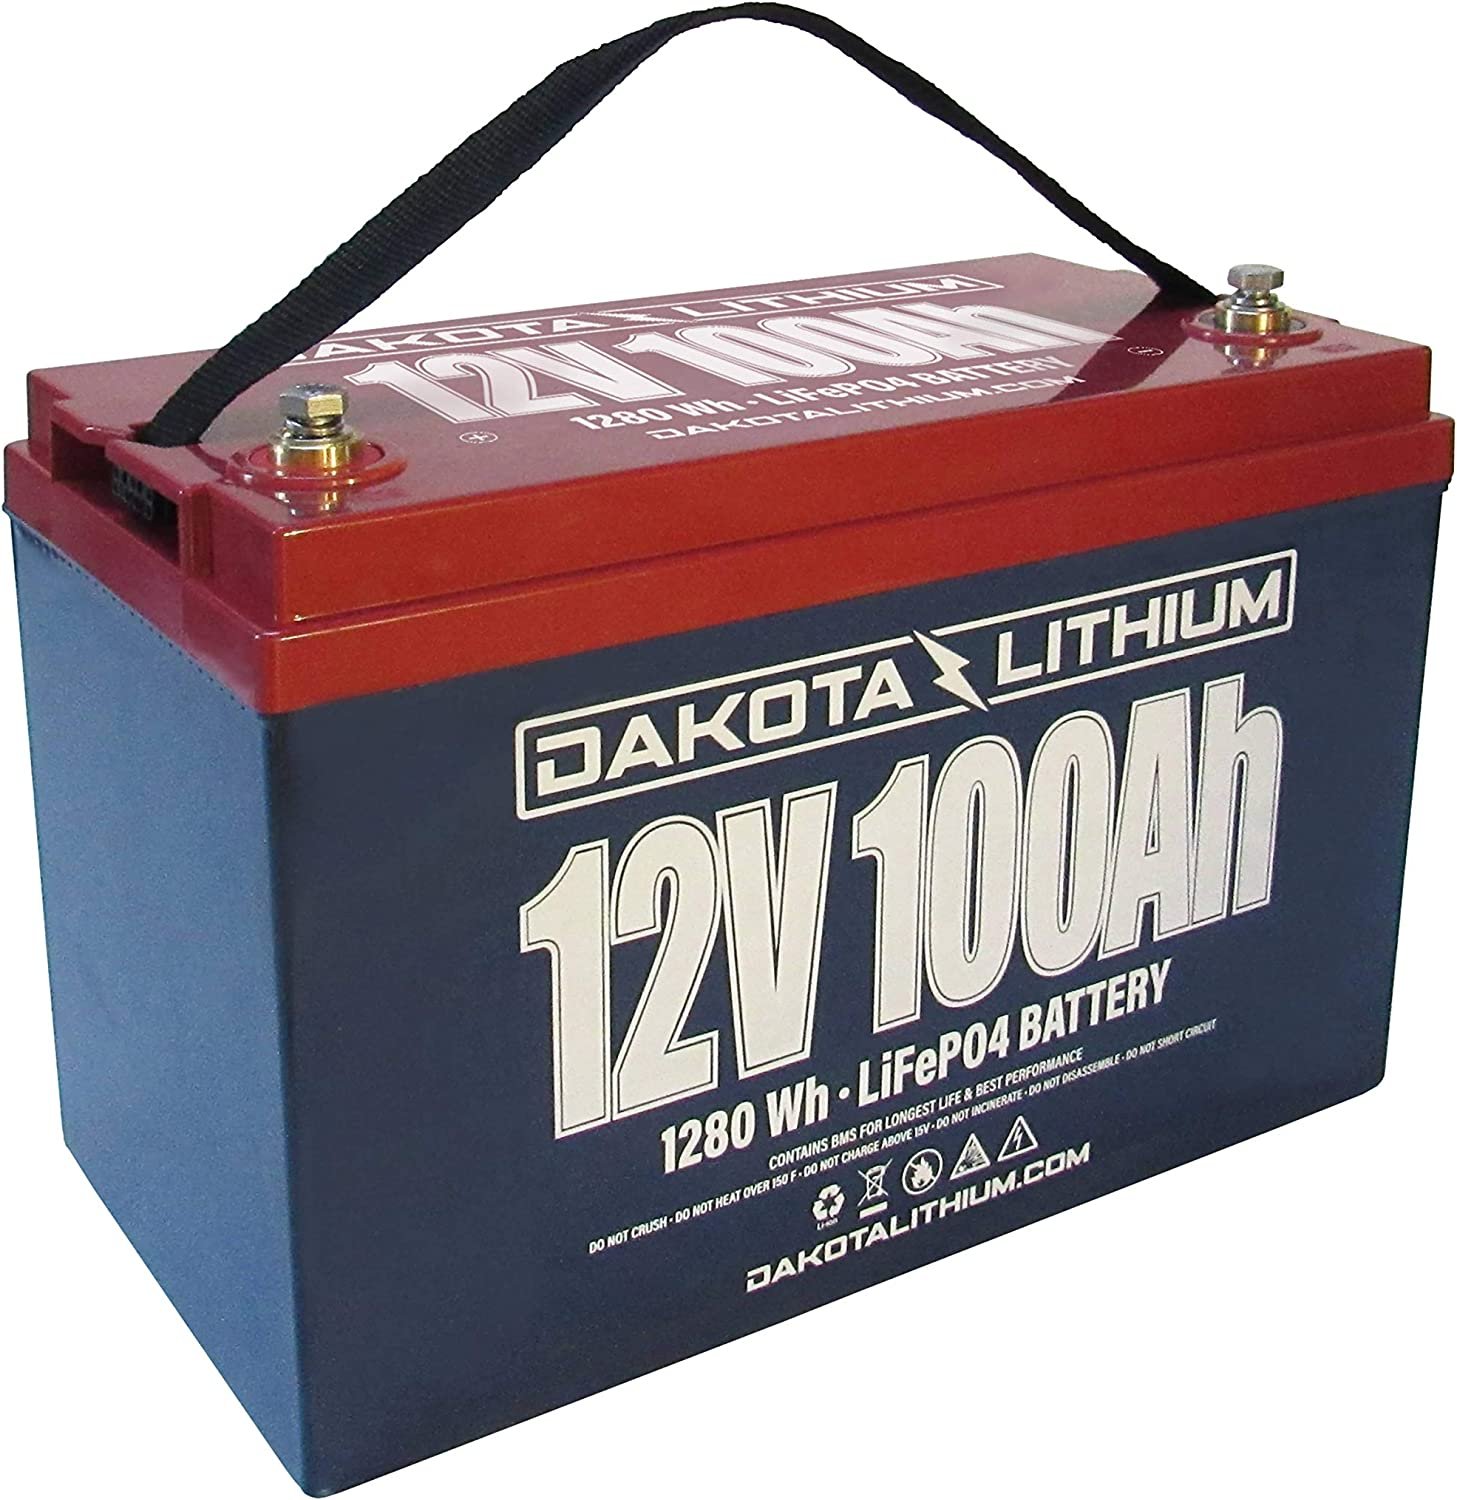 Dakota Lithium  12V 100Ah LiFePO4  11 Year USA Warranty 2000+ Deep Cycle Battery  Charger Included - image 1 of 9